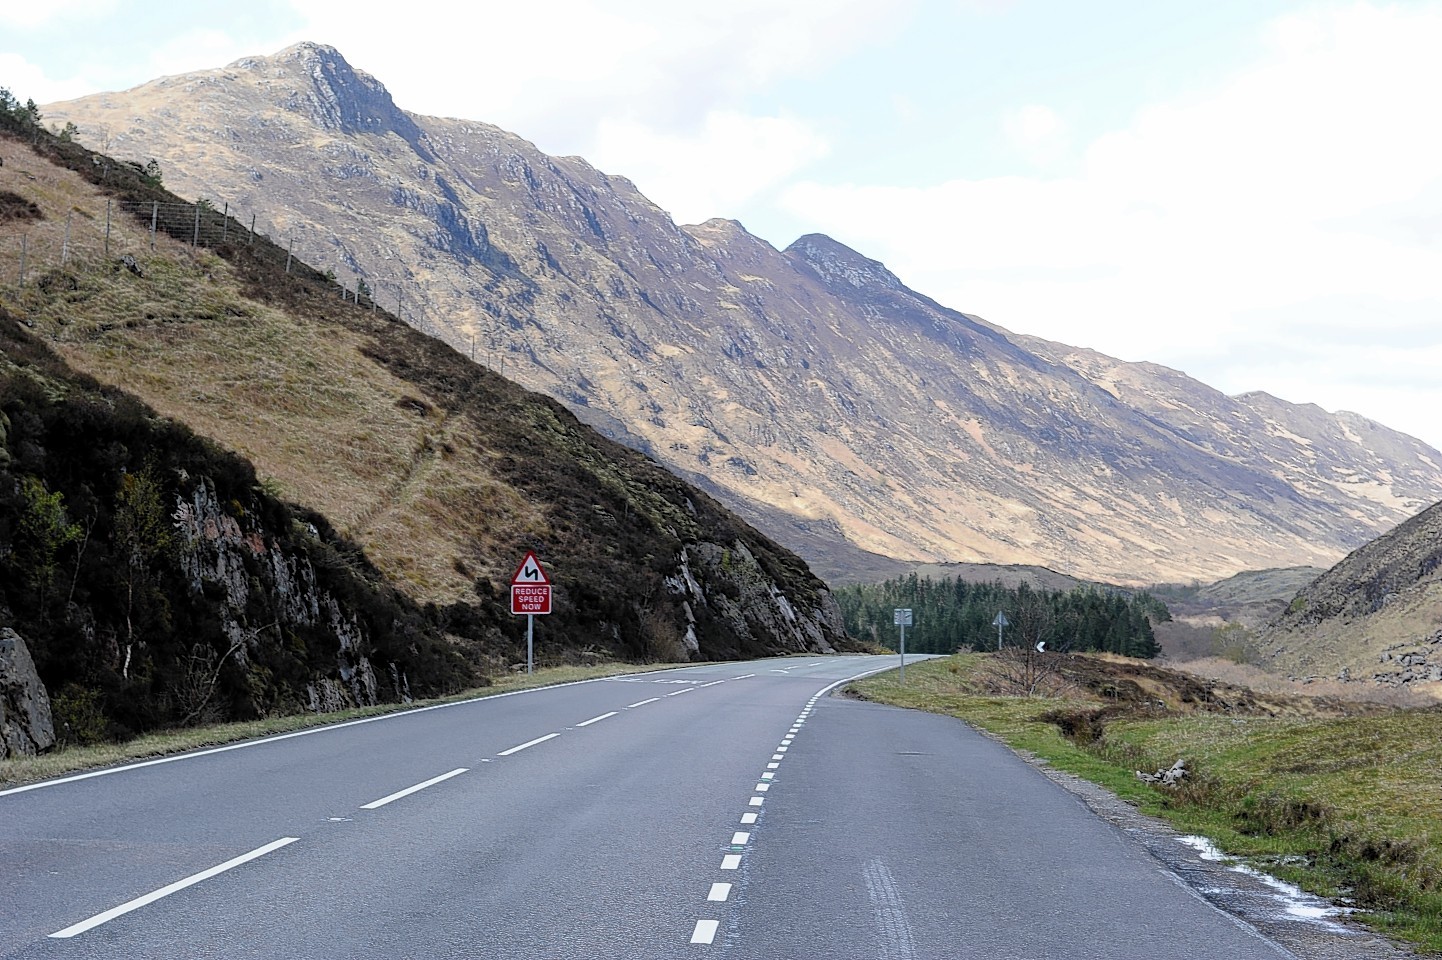 The incident happened on the A87 road